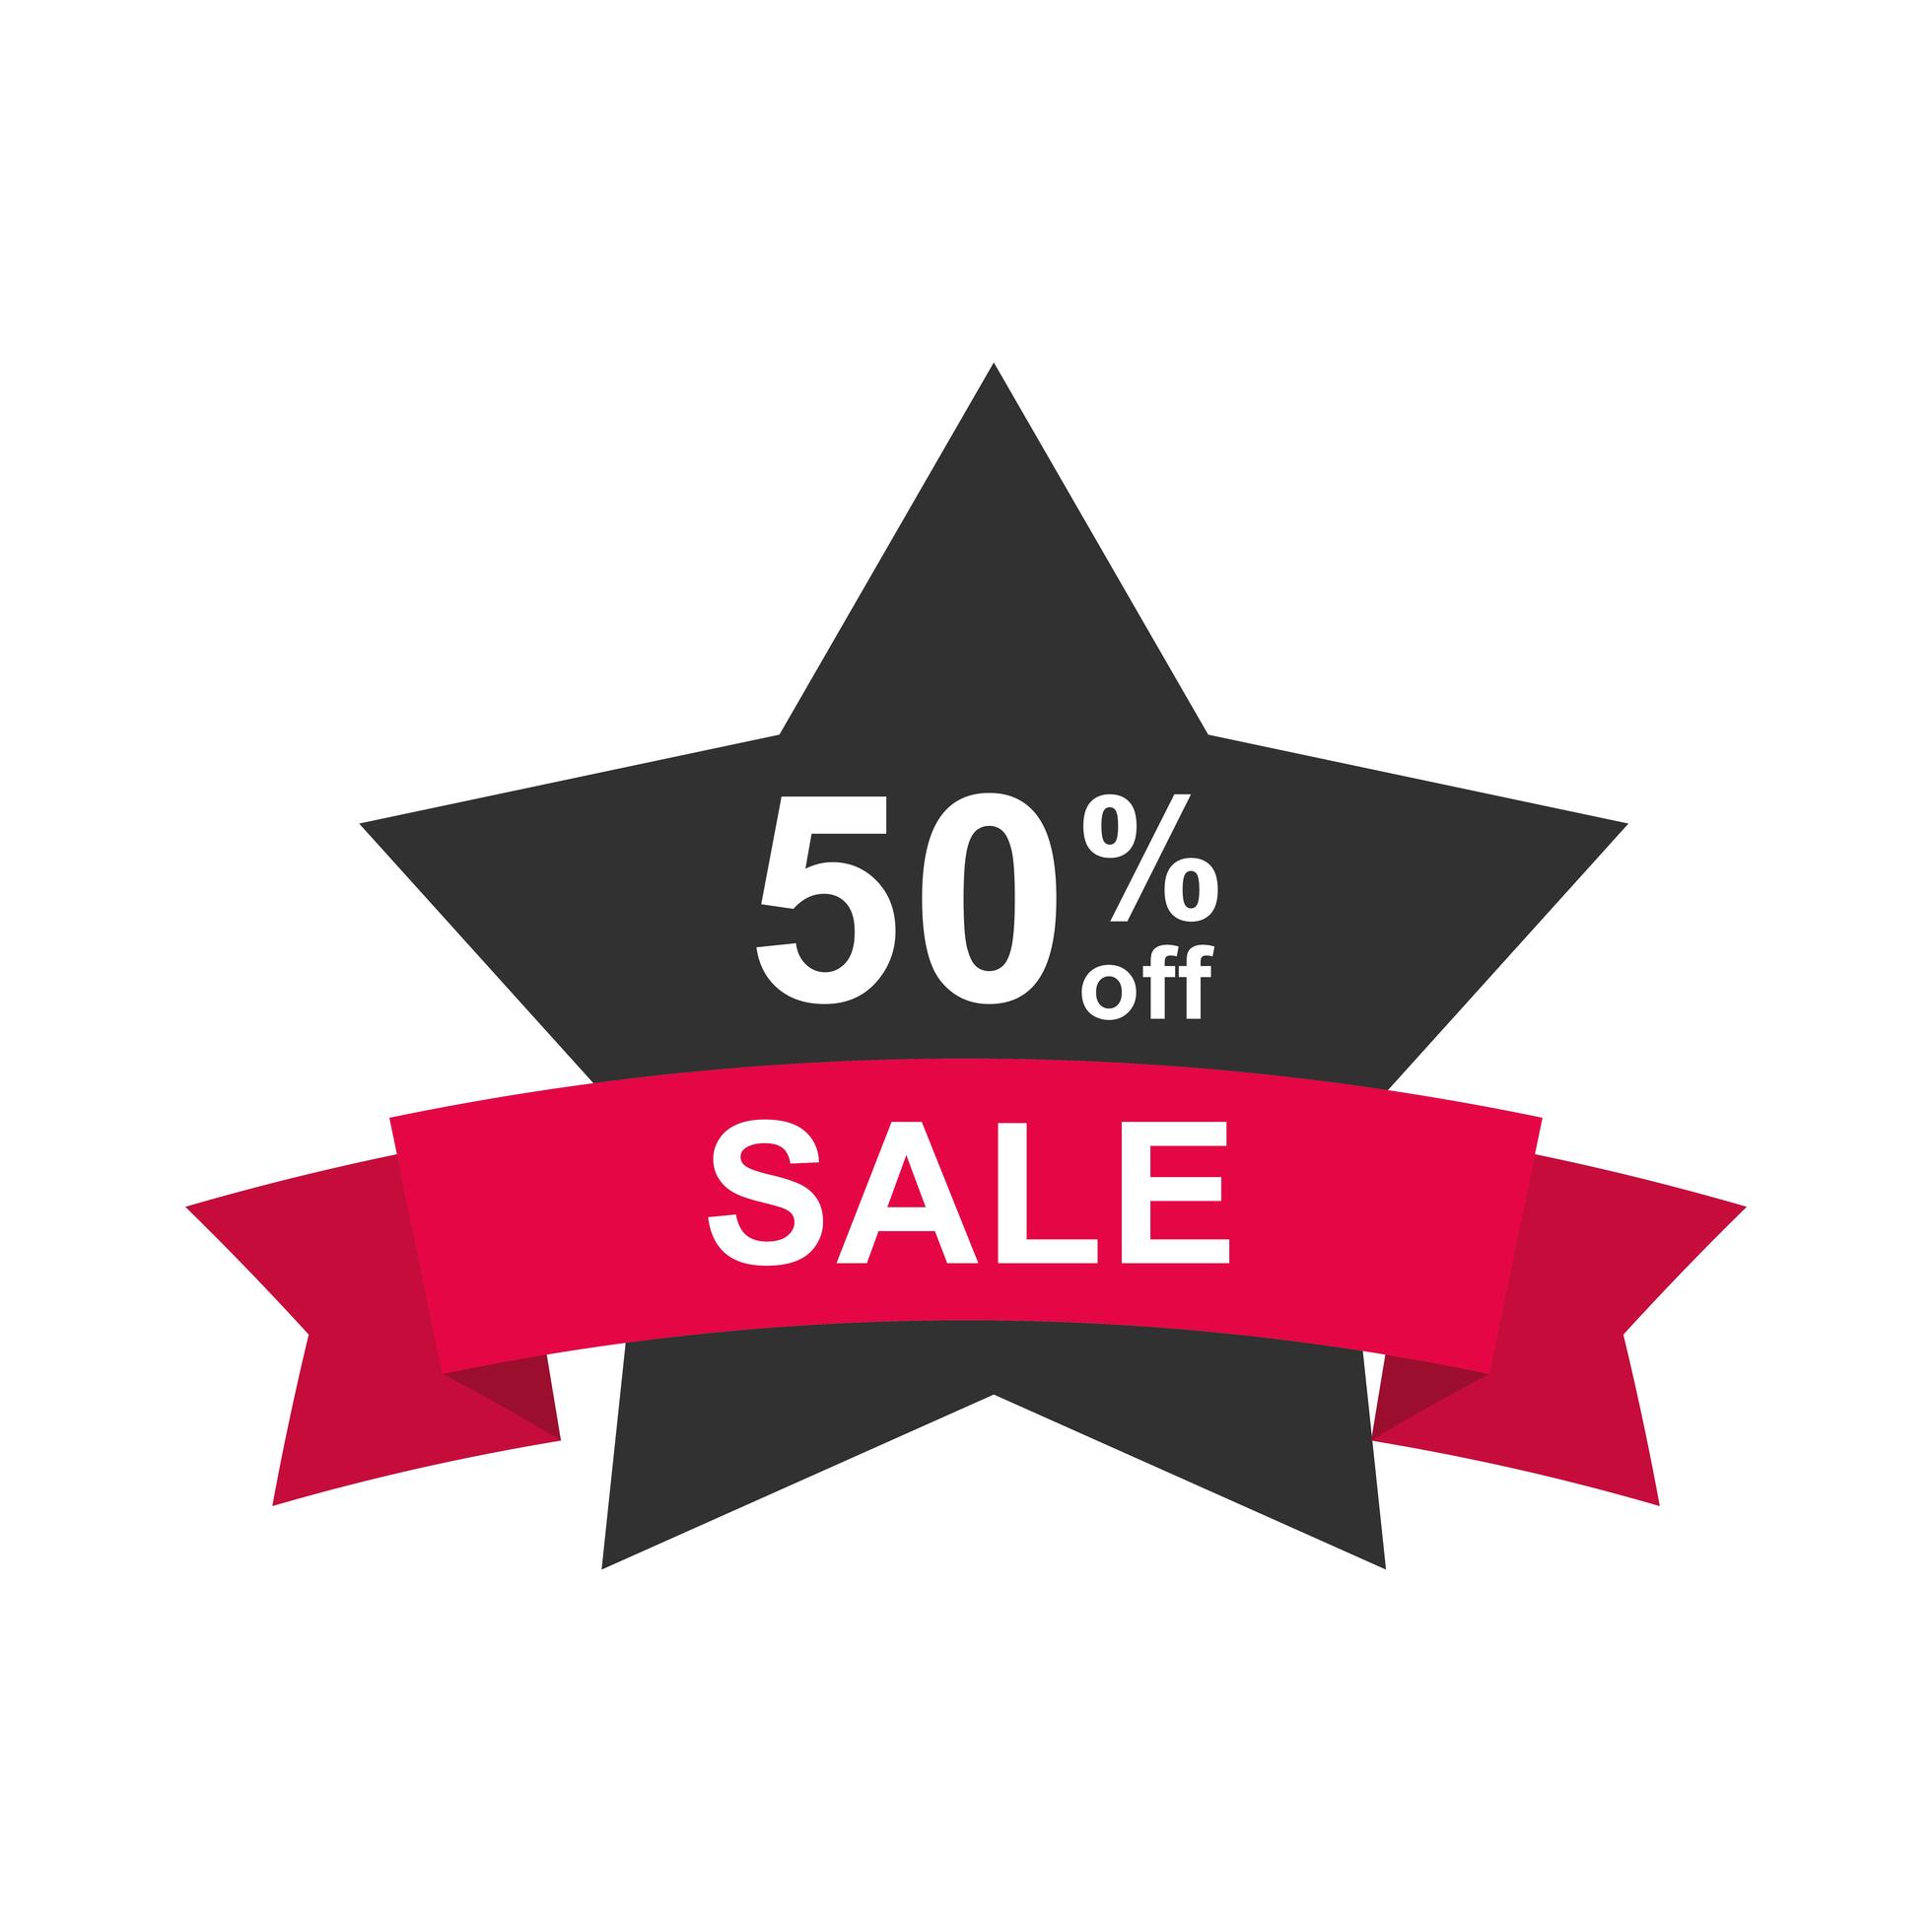 Black Friday Sale Offer Half Price Sticker Shaped Star Icon Flat Style